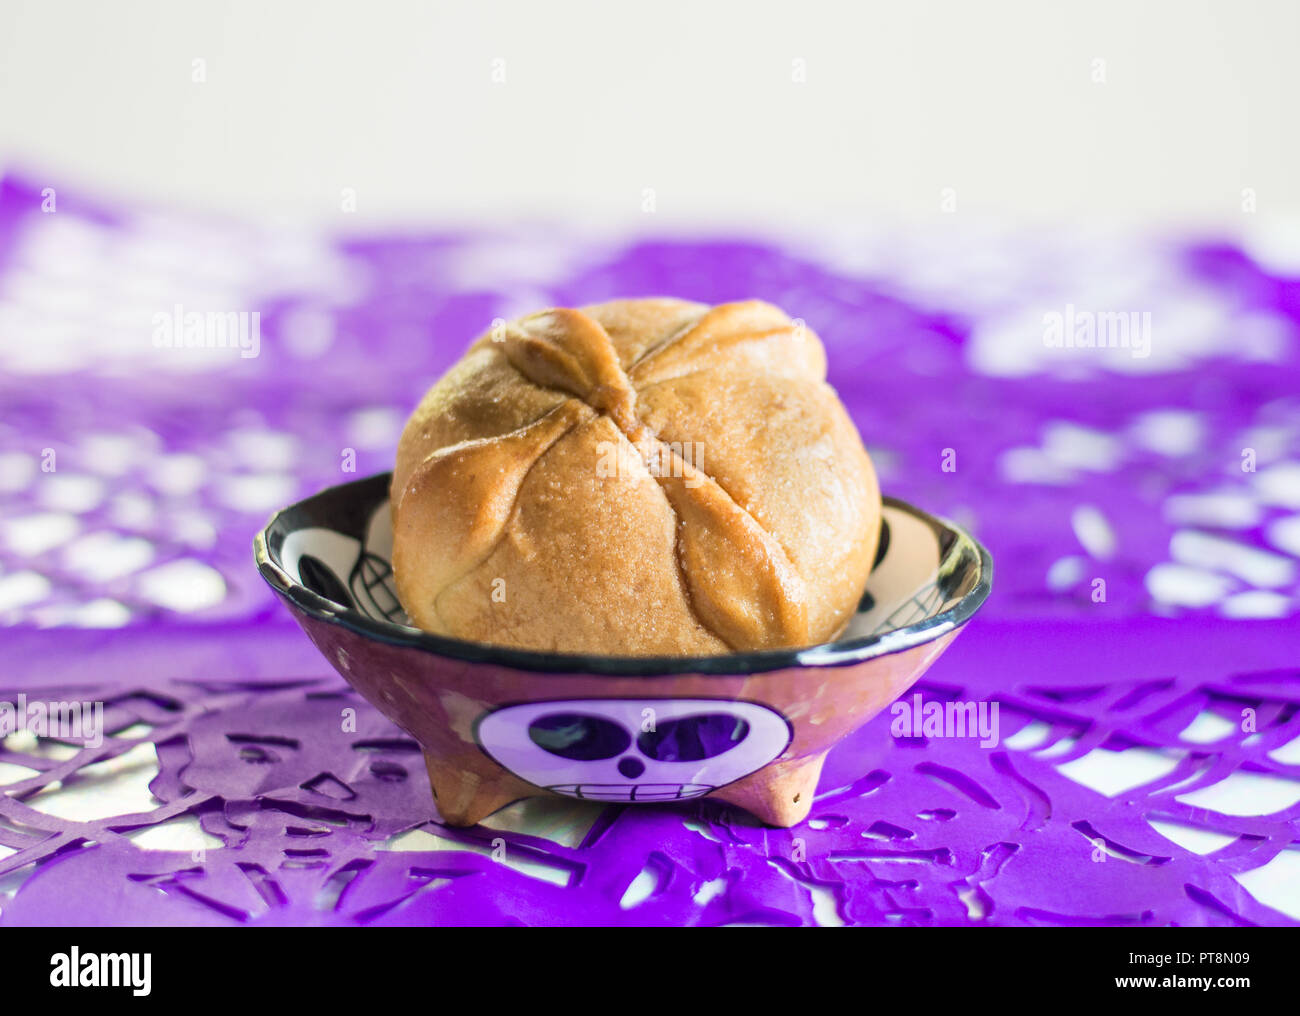 Day of the dead traditional bread called pan de muerto and purple papel picado as decoration. Stock Photo